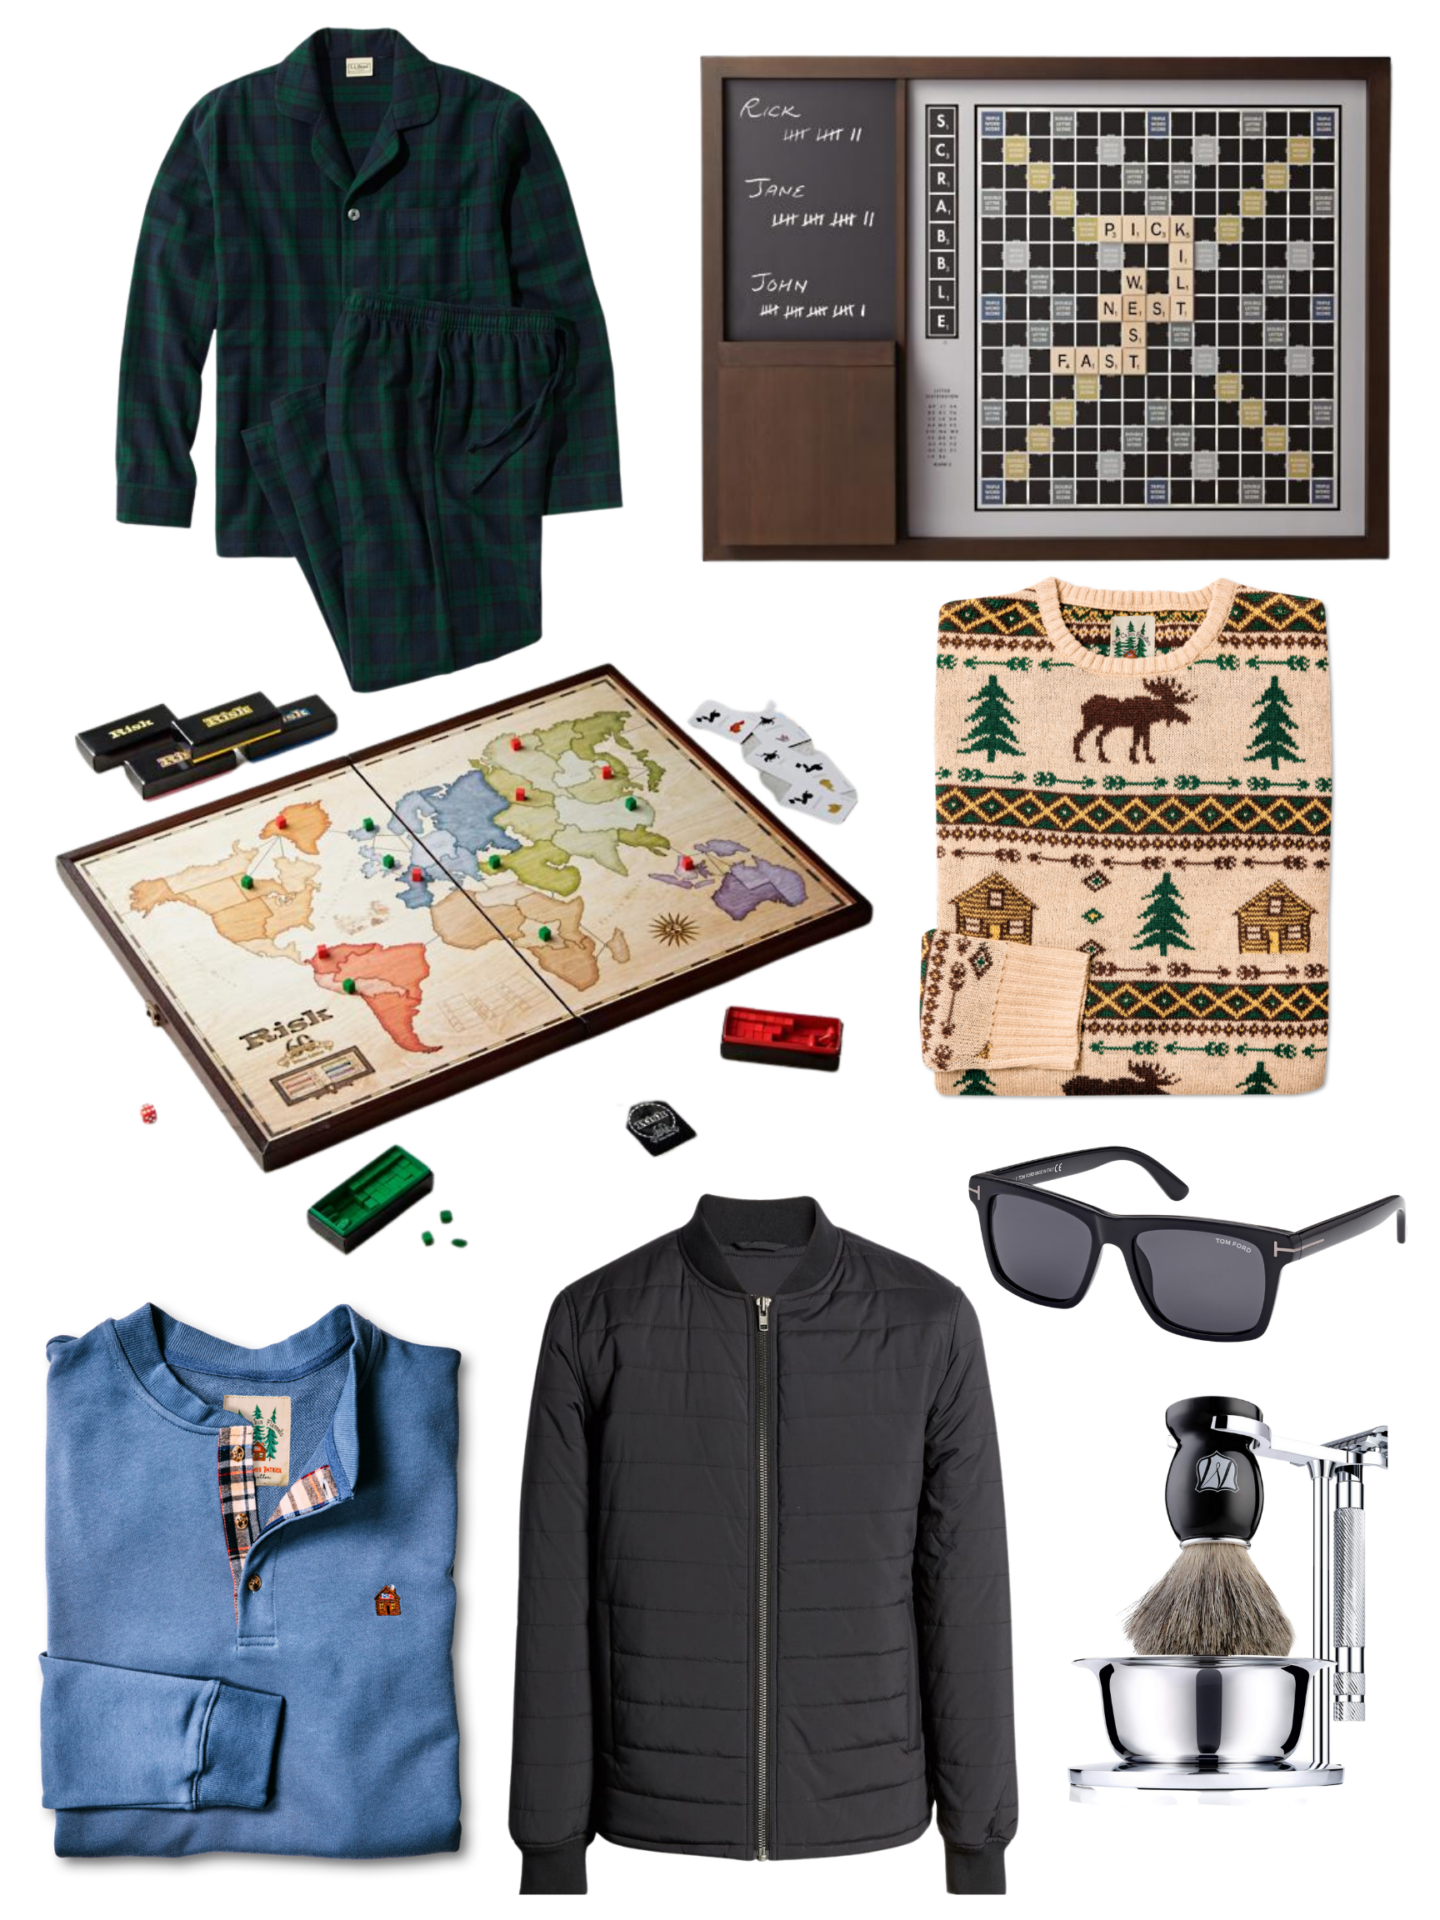 Top 9 Holiday Gift Ideas for Him featured by top Dallas life and style blogger, Pretty Little Shoppers